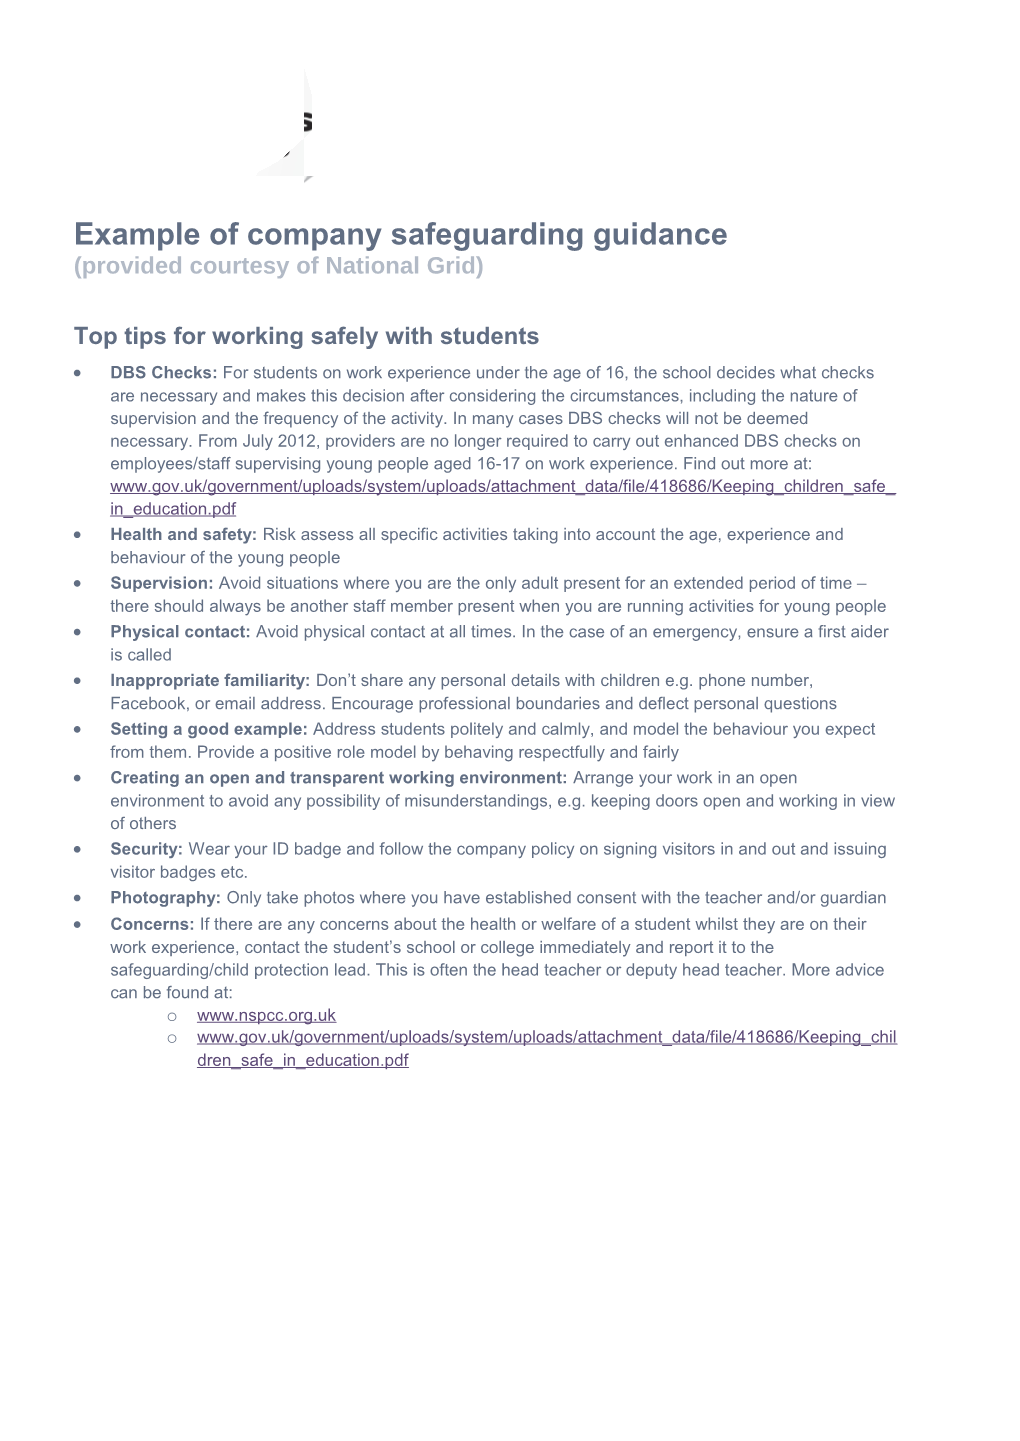 Example of Company Safeguarding Guidance